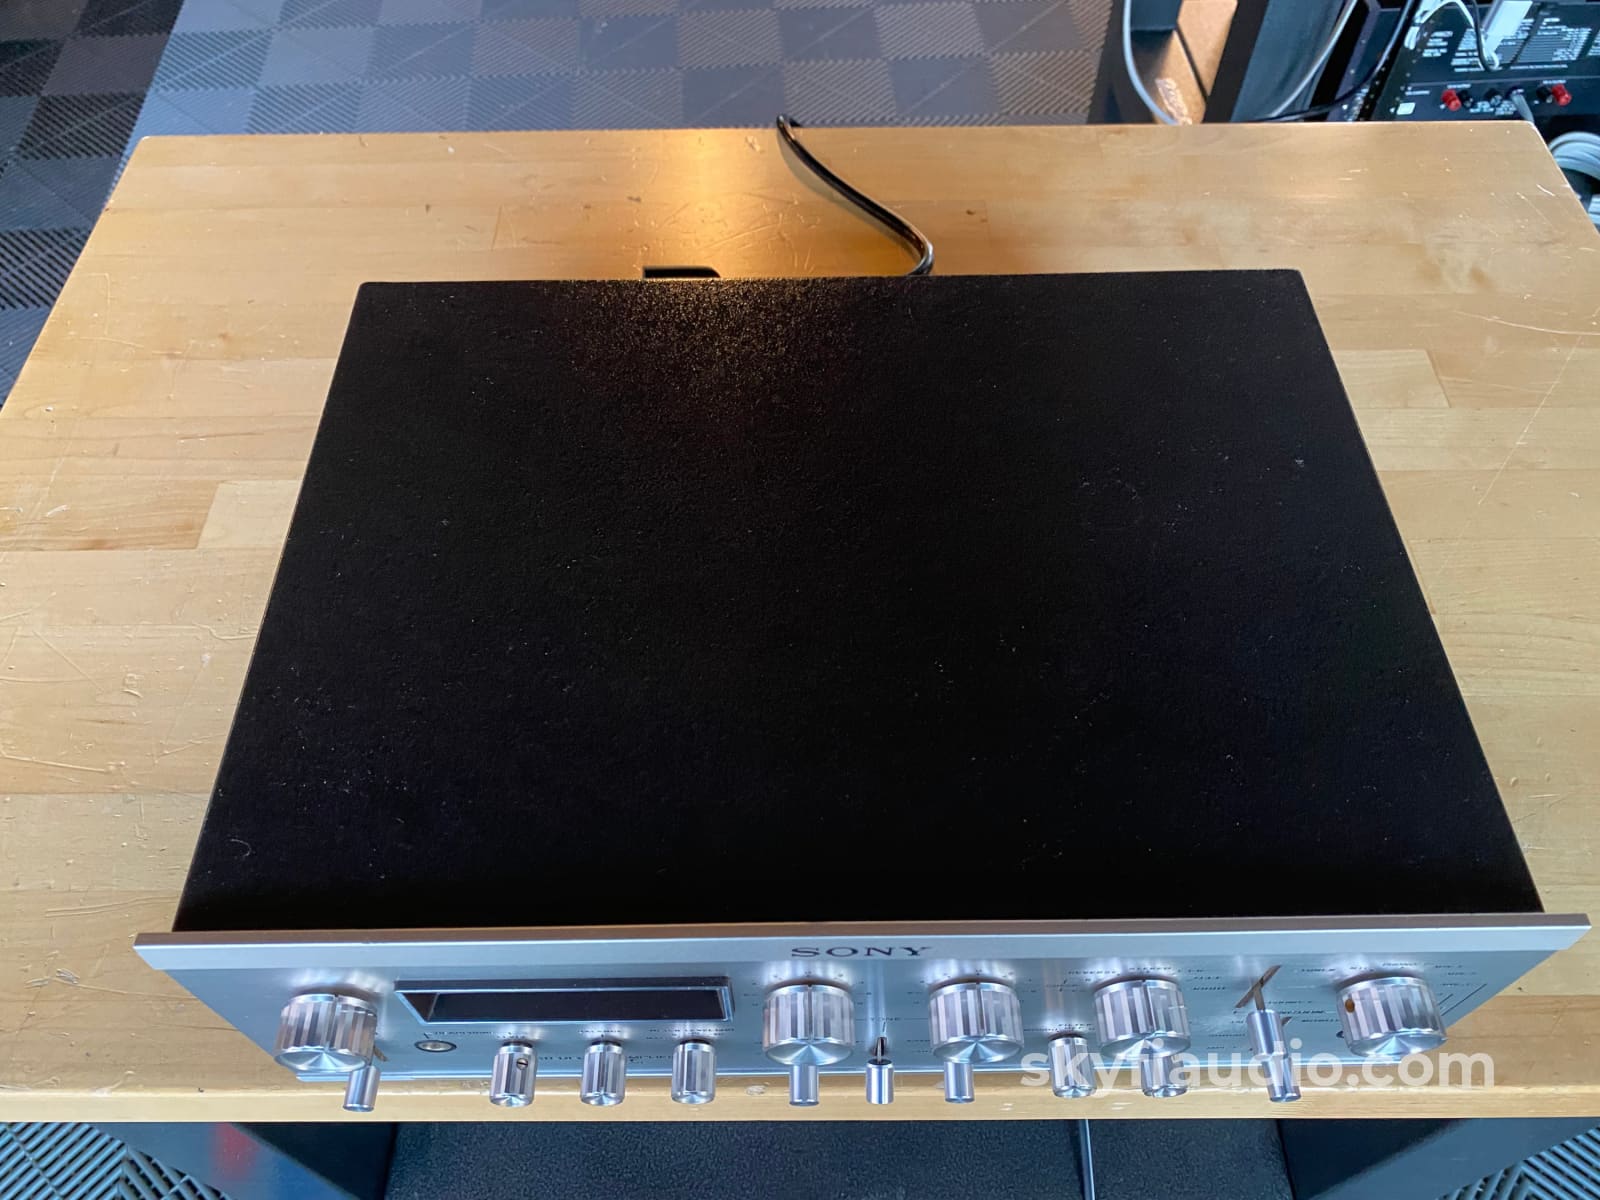 Sony Ta-2000F Vintage Preamplifier With Phono And Meters